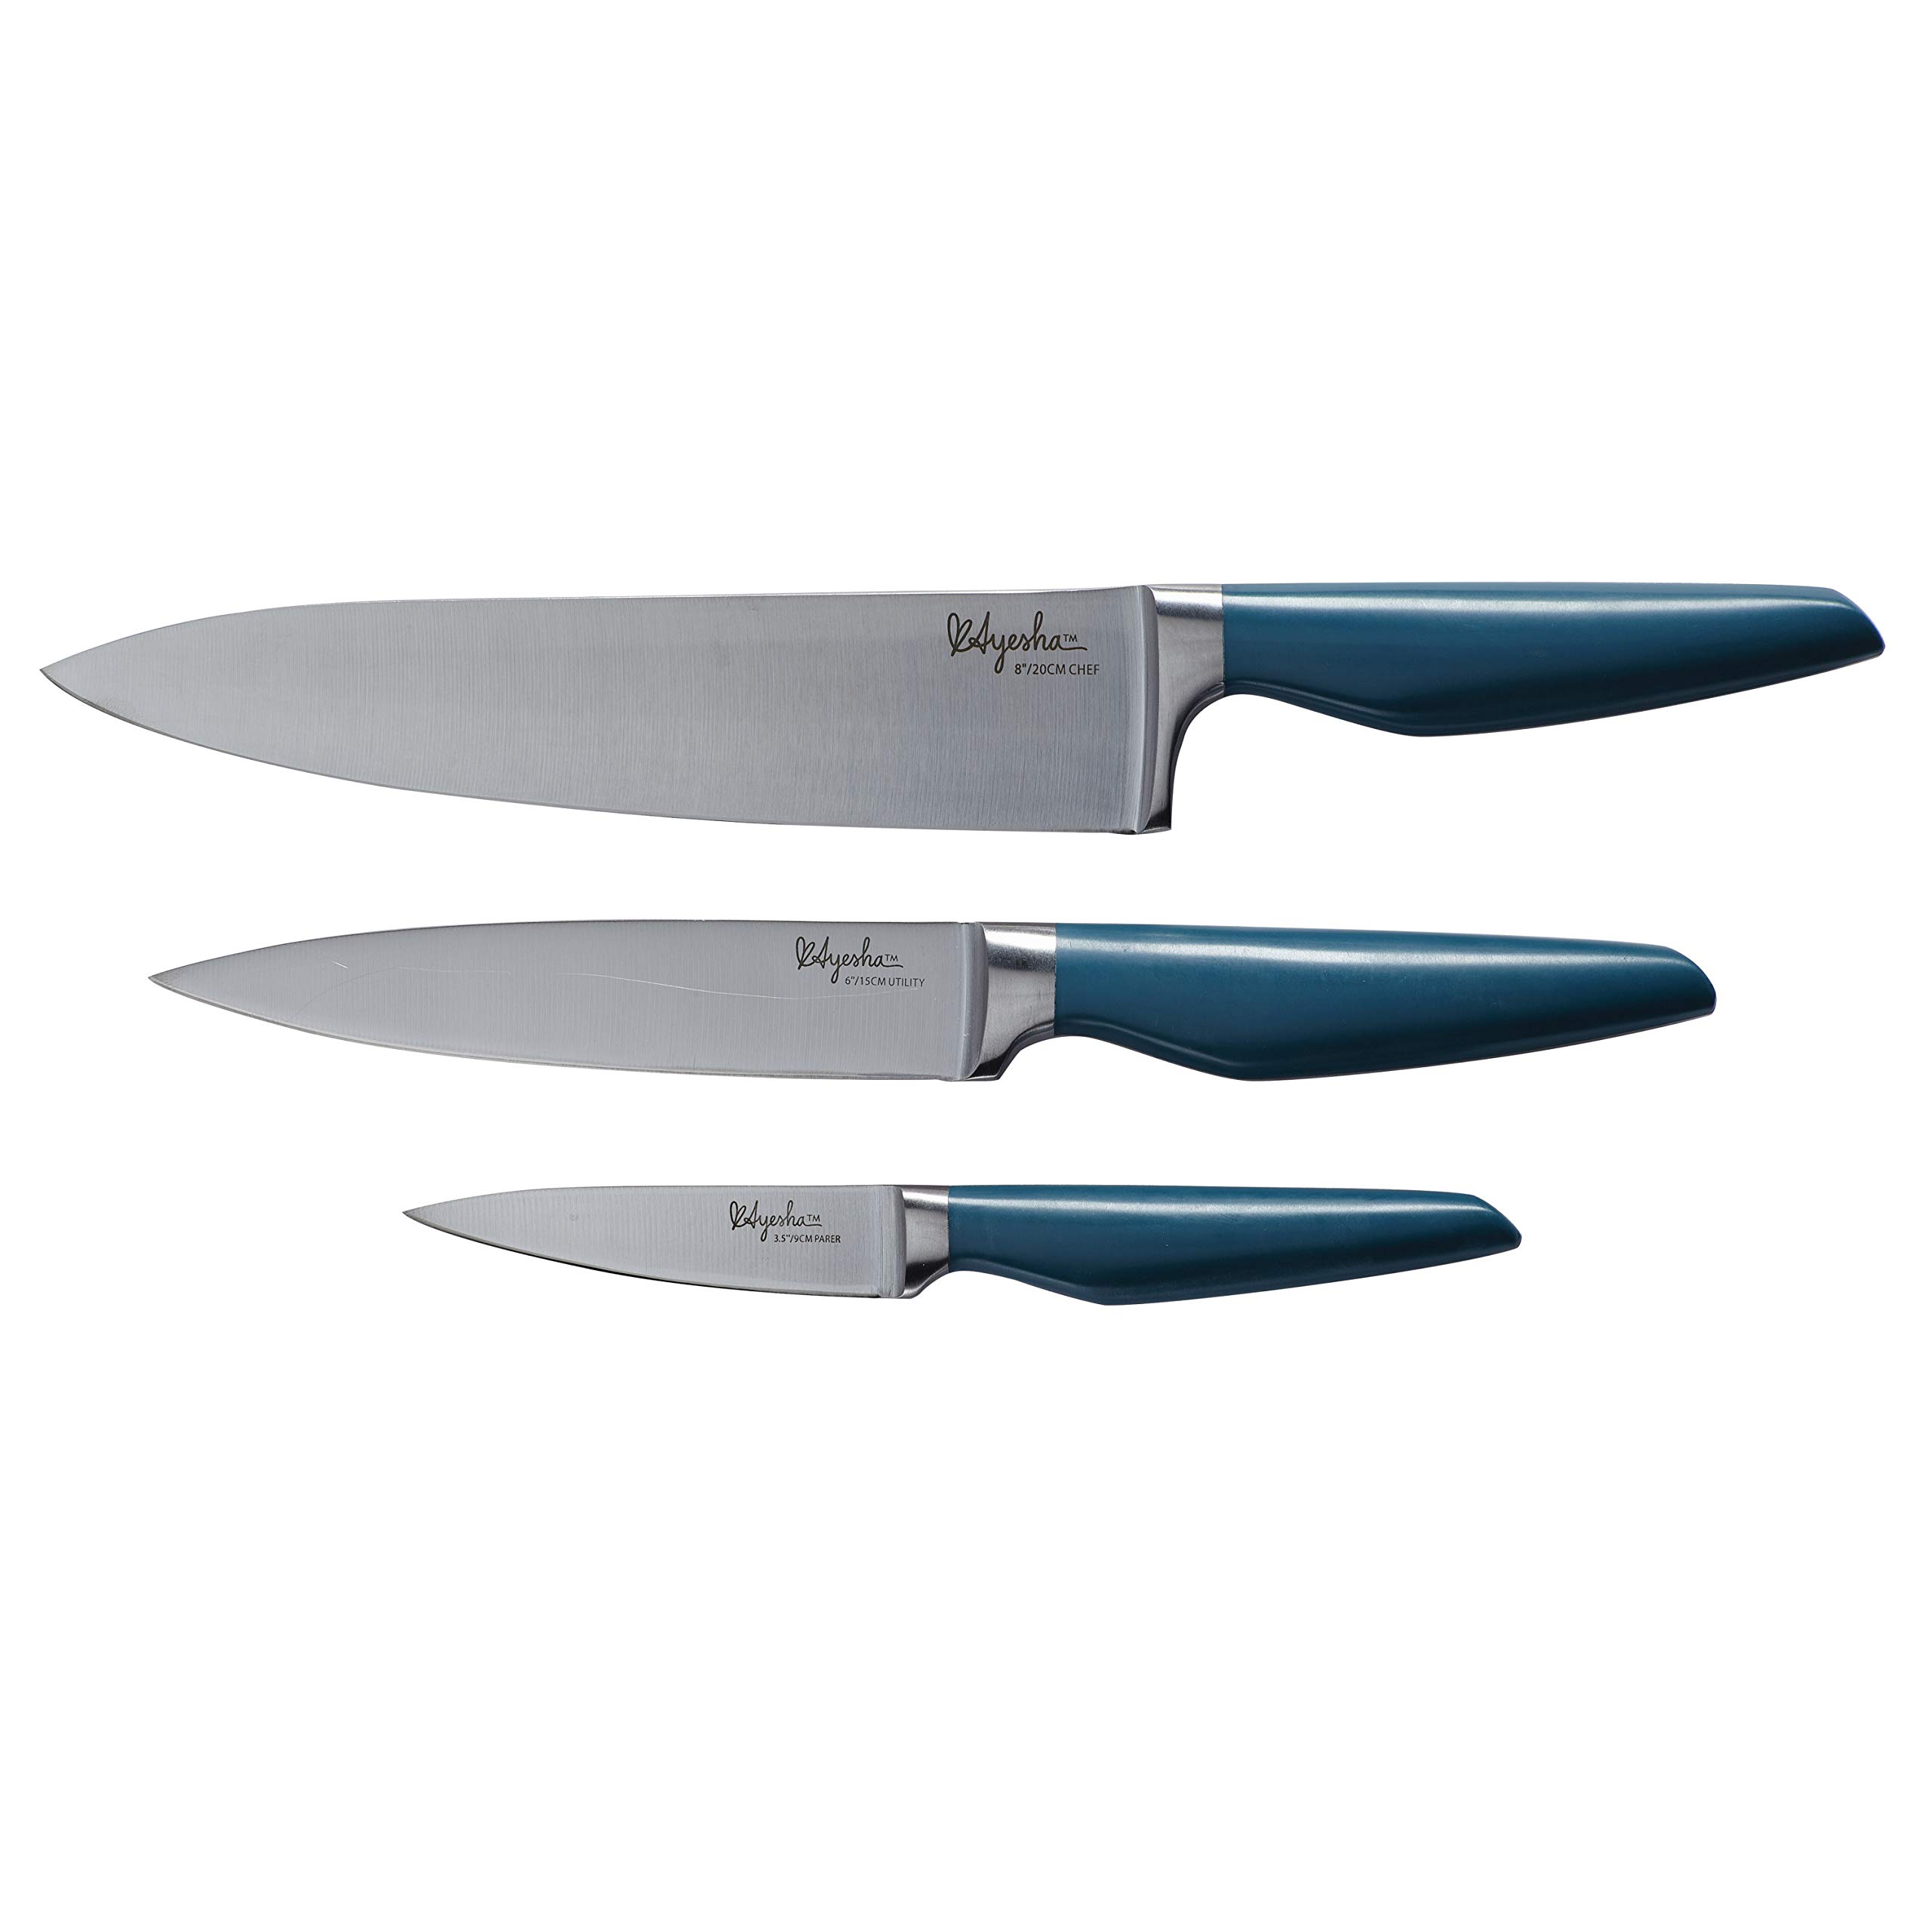 Ayesha Curry Cutlery Japanese Stainless Steel Knife Cooking Knives Set with Sheaths, 8 Inch Chef Knife, 6 Inch Utility Knife, 3.5 Inch Paring Knife, Twilight Teal Blue